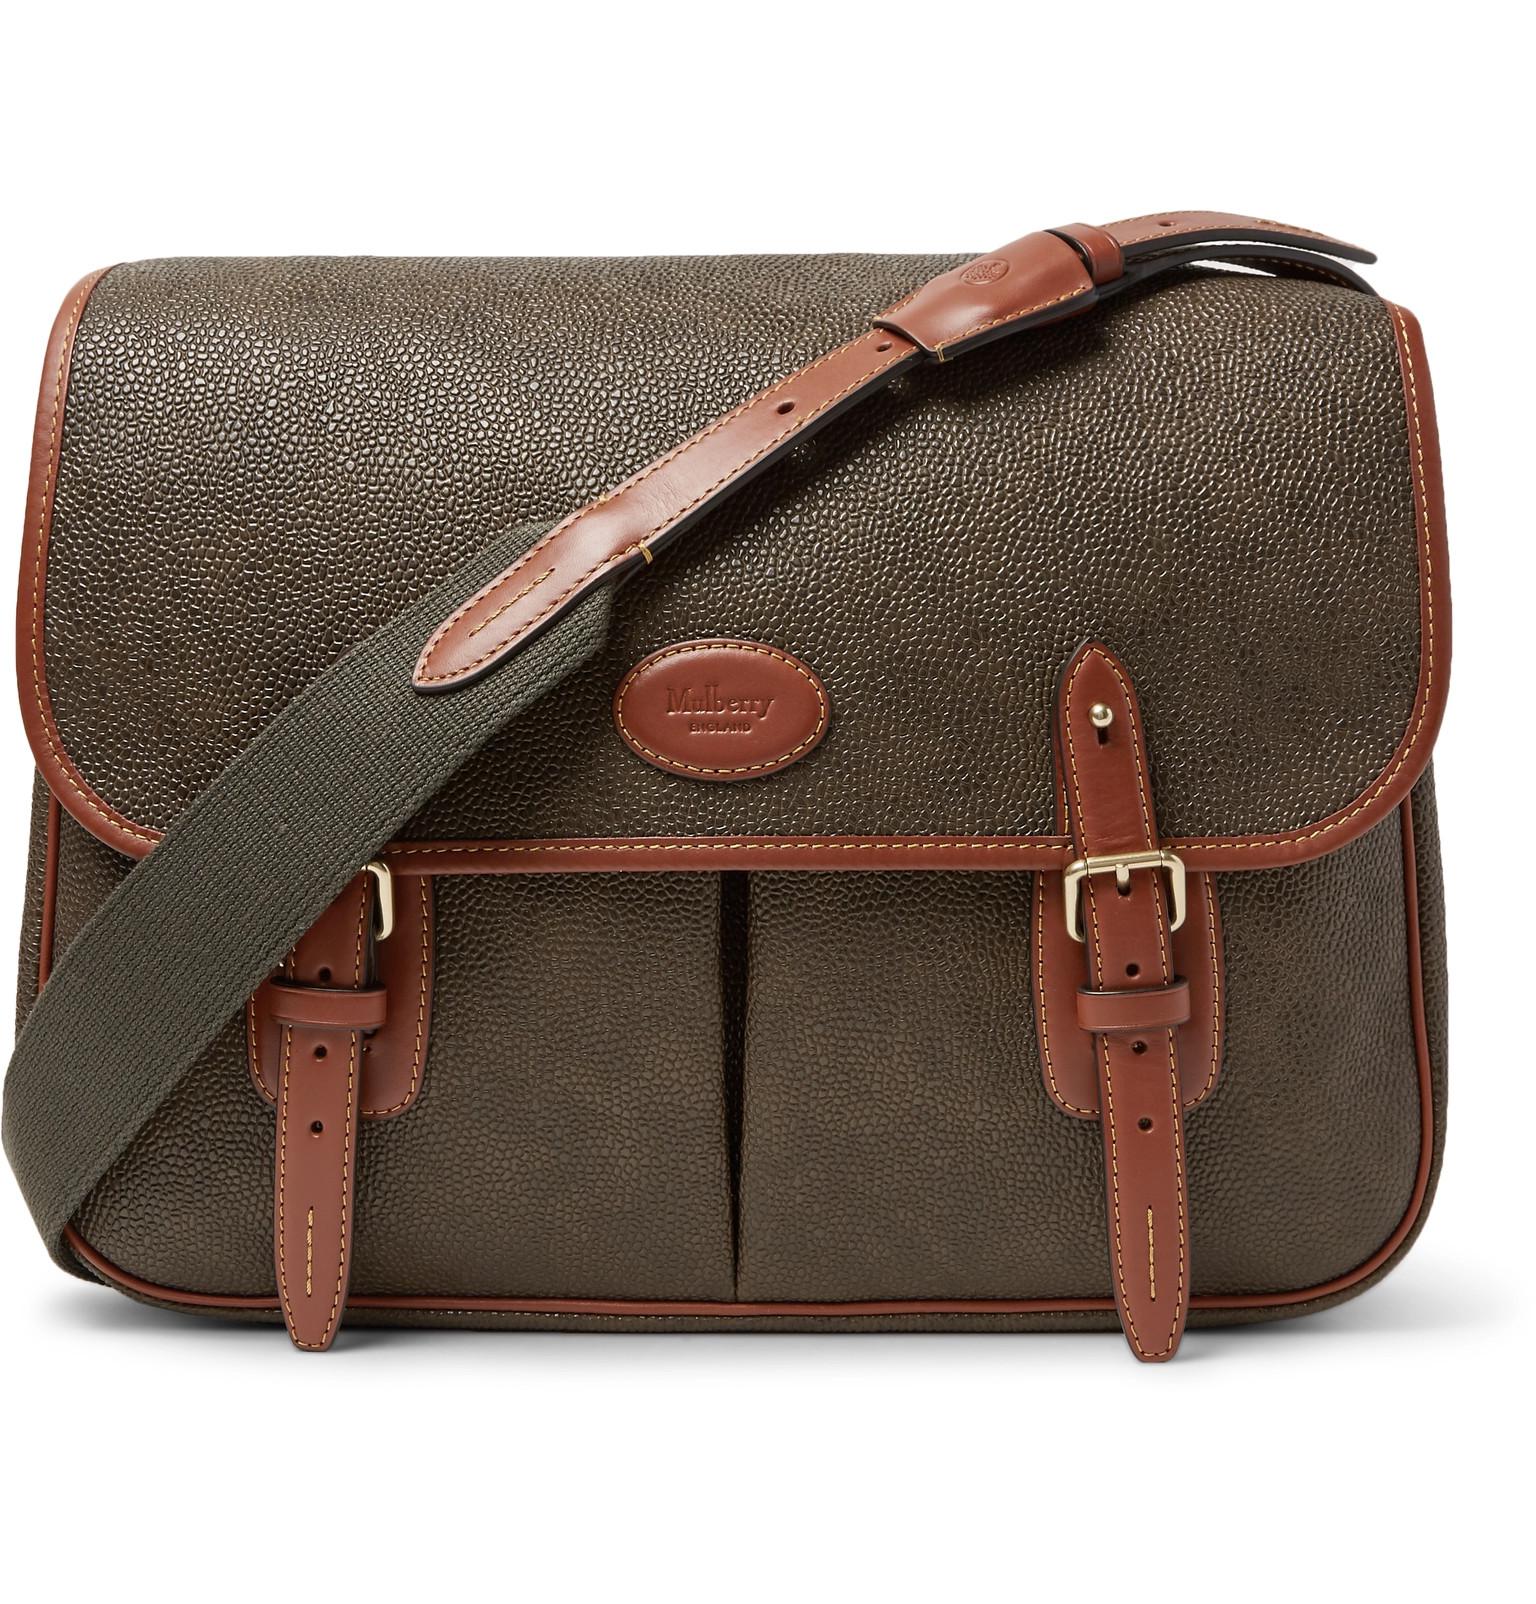 Mulberry Heritage Leather-trimmed Pebble-grain Coated-canvas Messenger Bag in Army Green (Green ...